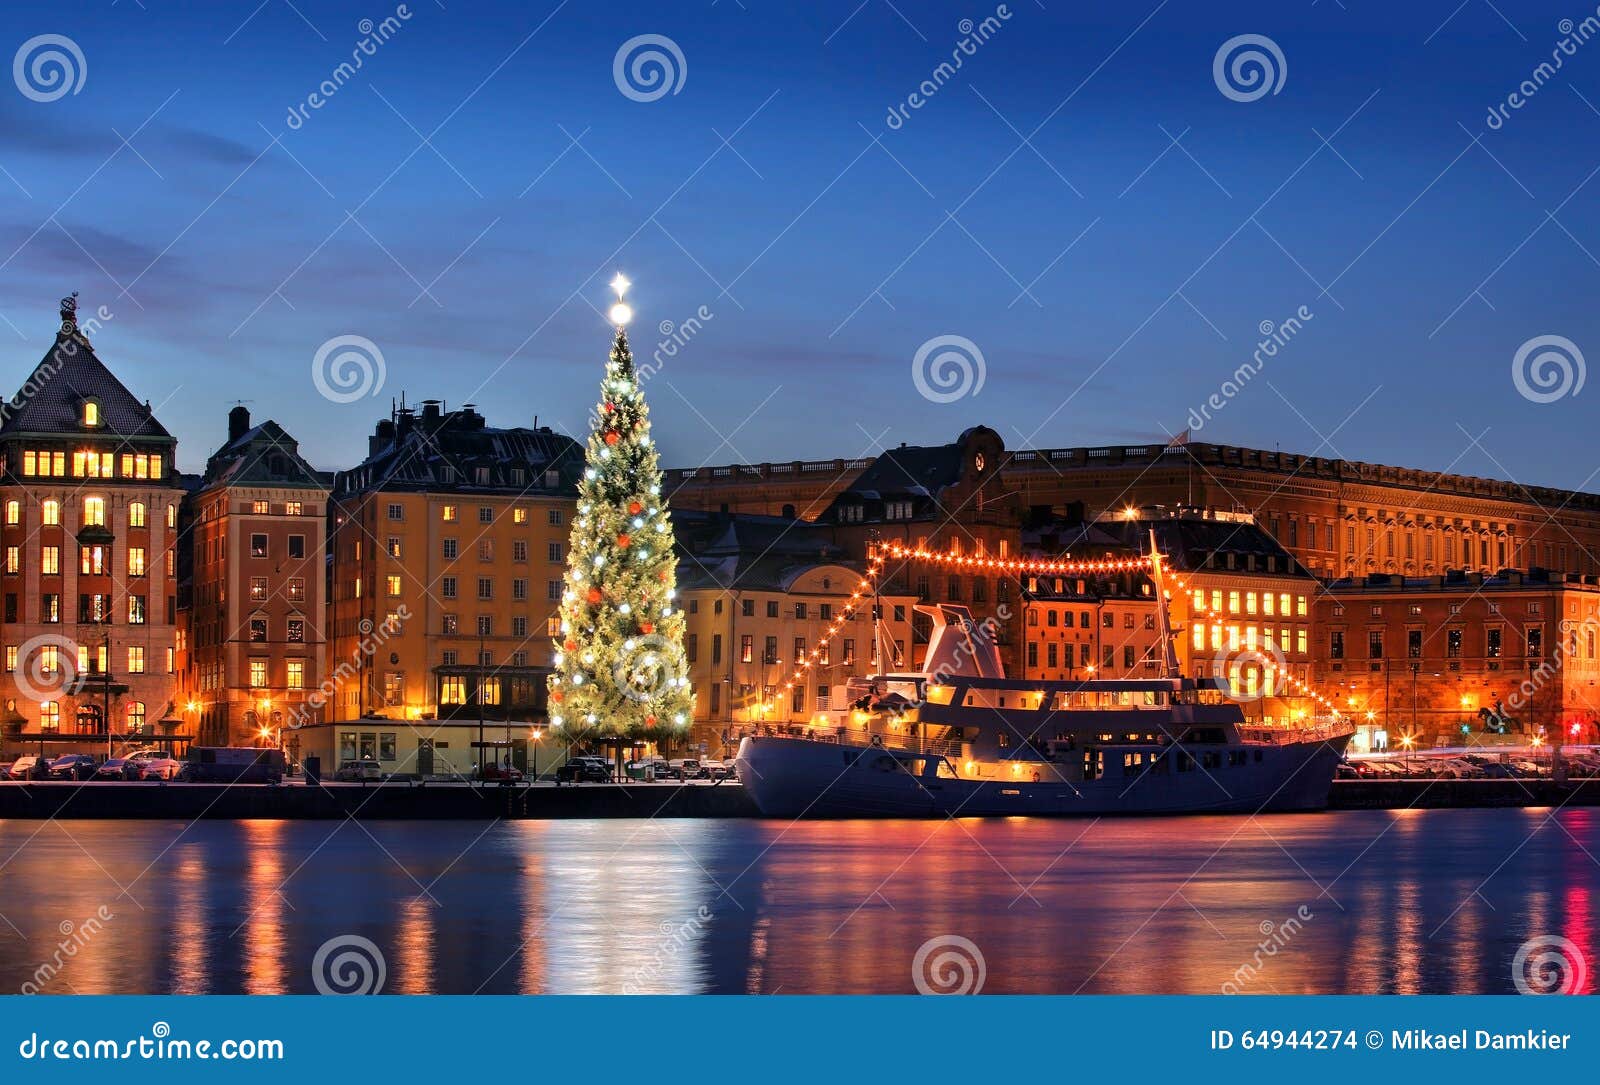 stockholms old city with christmas tree